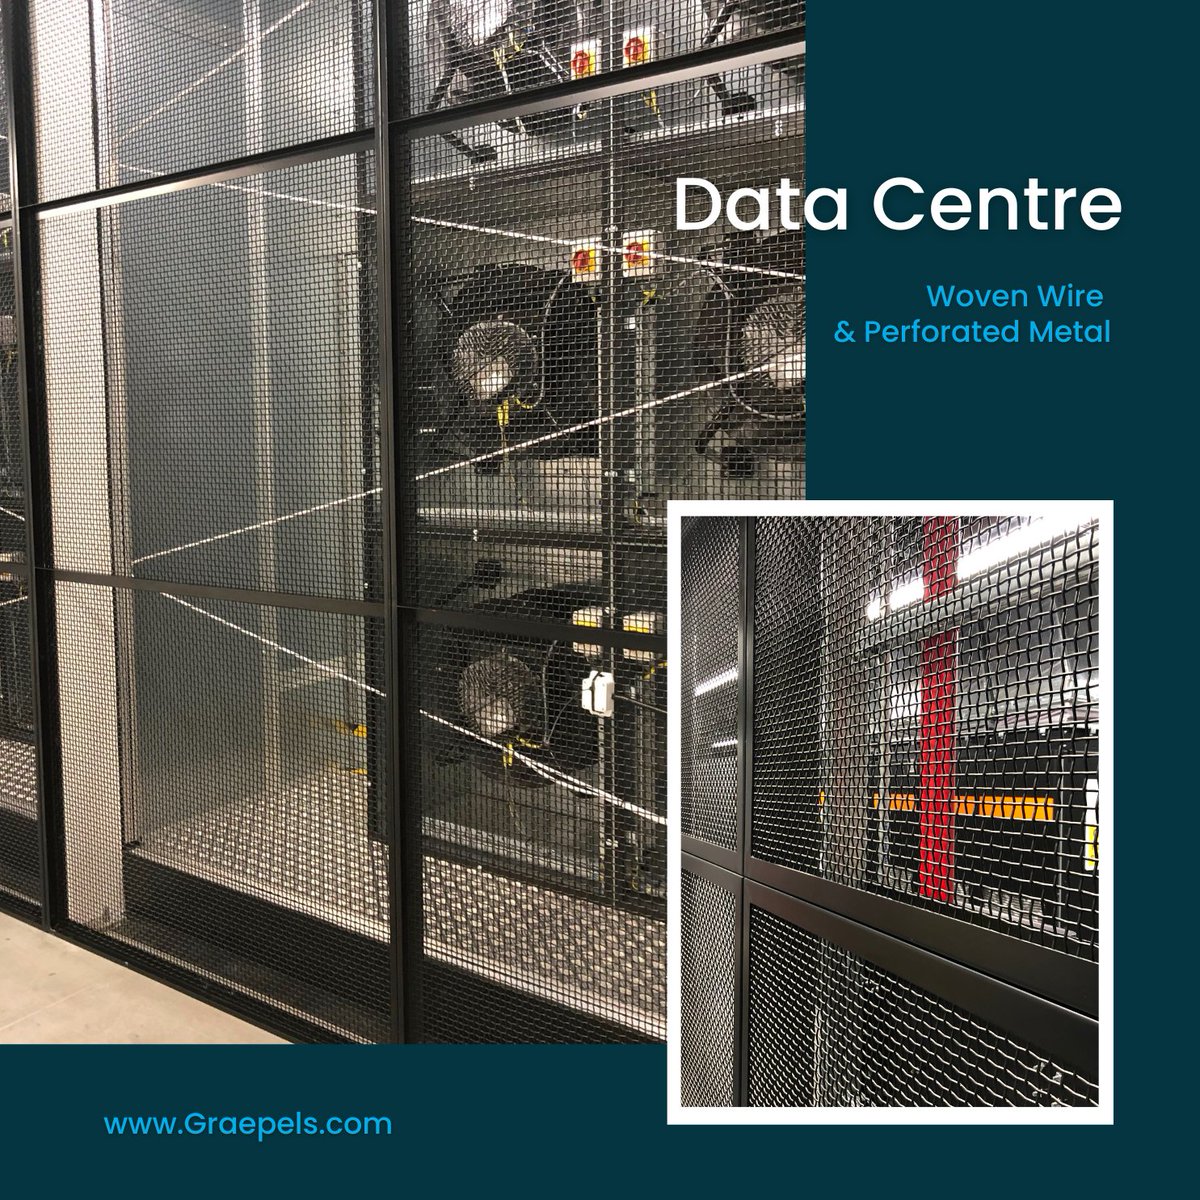 Graepels manufacture woven wire mesh for data centres.  Our wire mesh solutions offer exceptional durability, security, and strength critical for the optimal functioning of data centers.✨ Email info@graepels.com or call us for more information! 😊

#datacentres #wire #strength